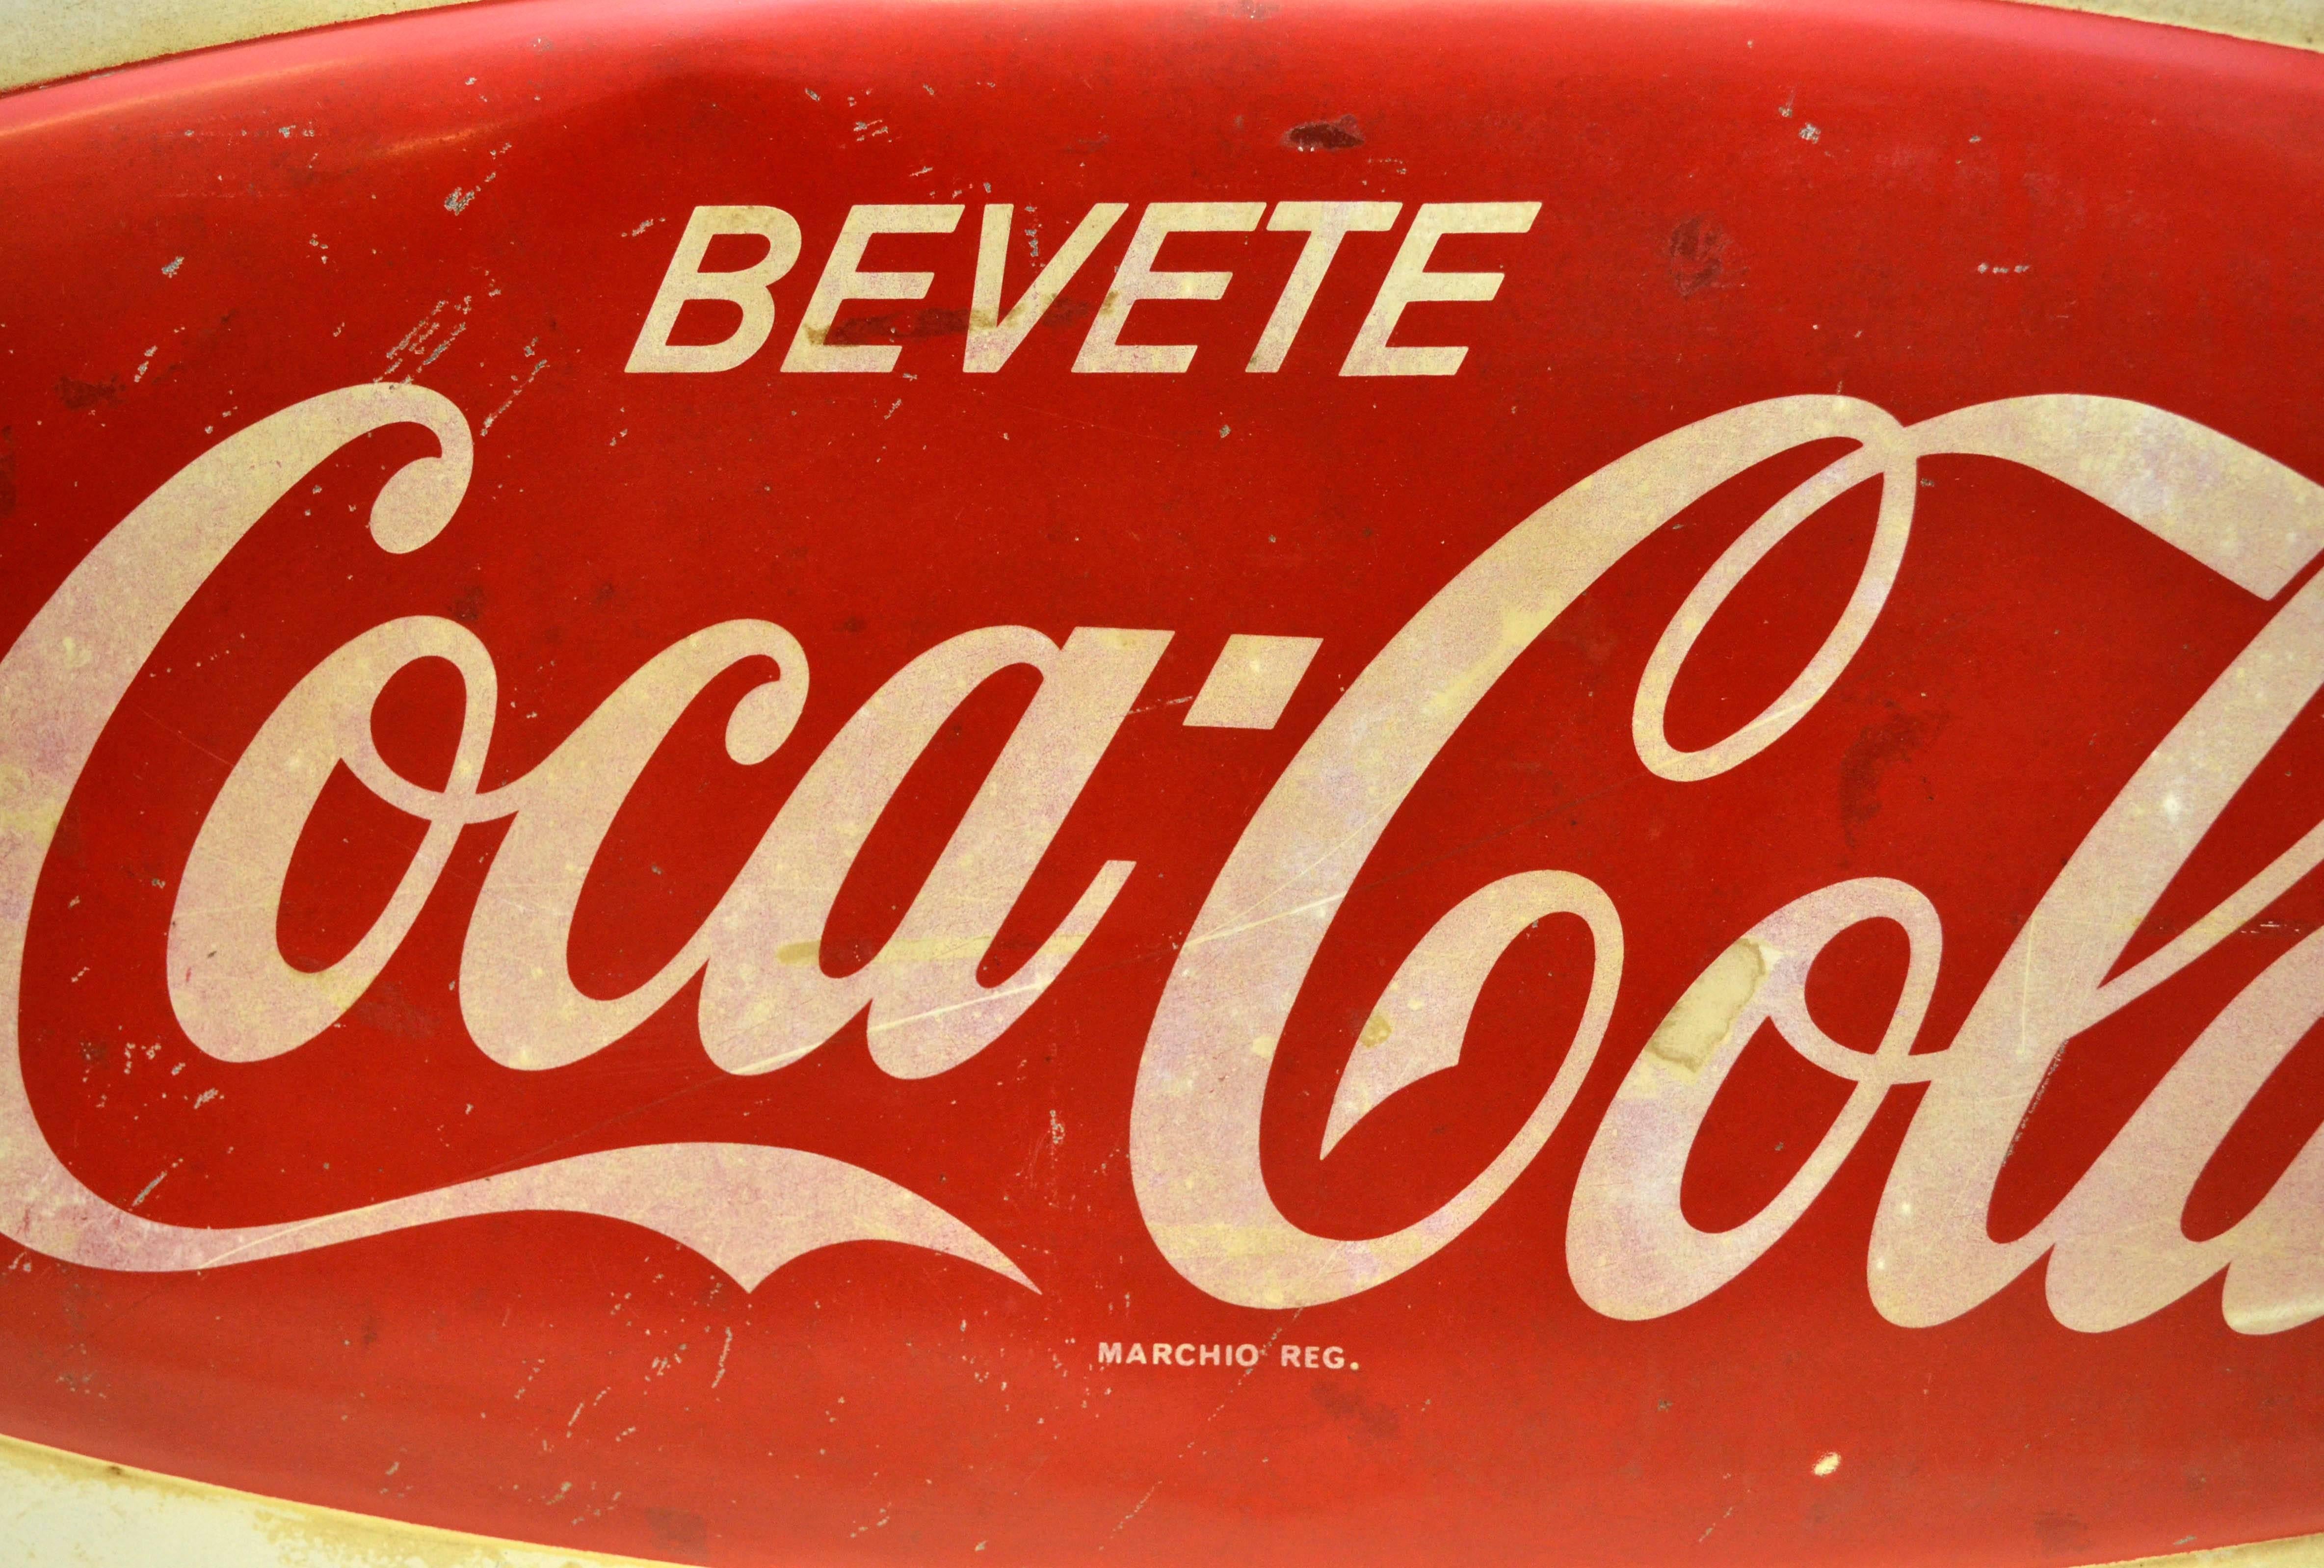 1950s Red and White Vintage Italian Metal Screen Printed Coca-Cola Sign im Zustand „Gut“ im Angebot in Milan, IT